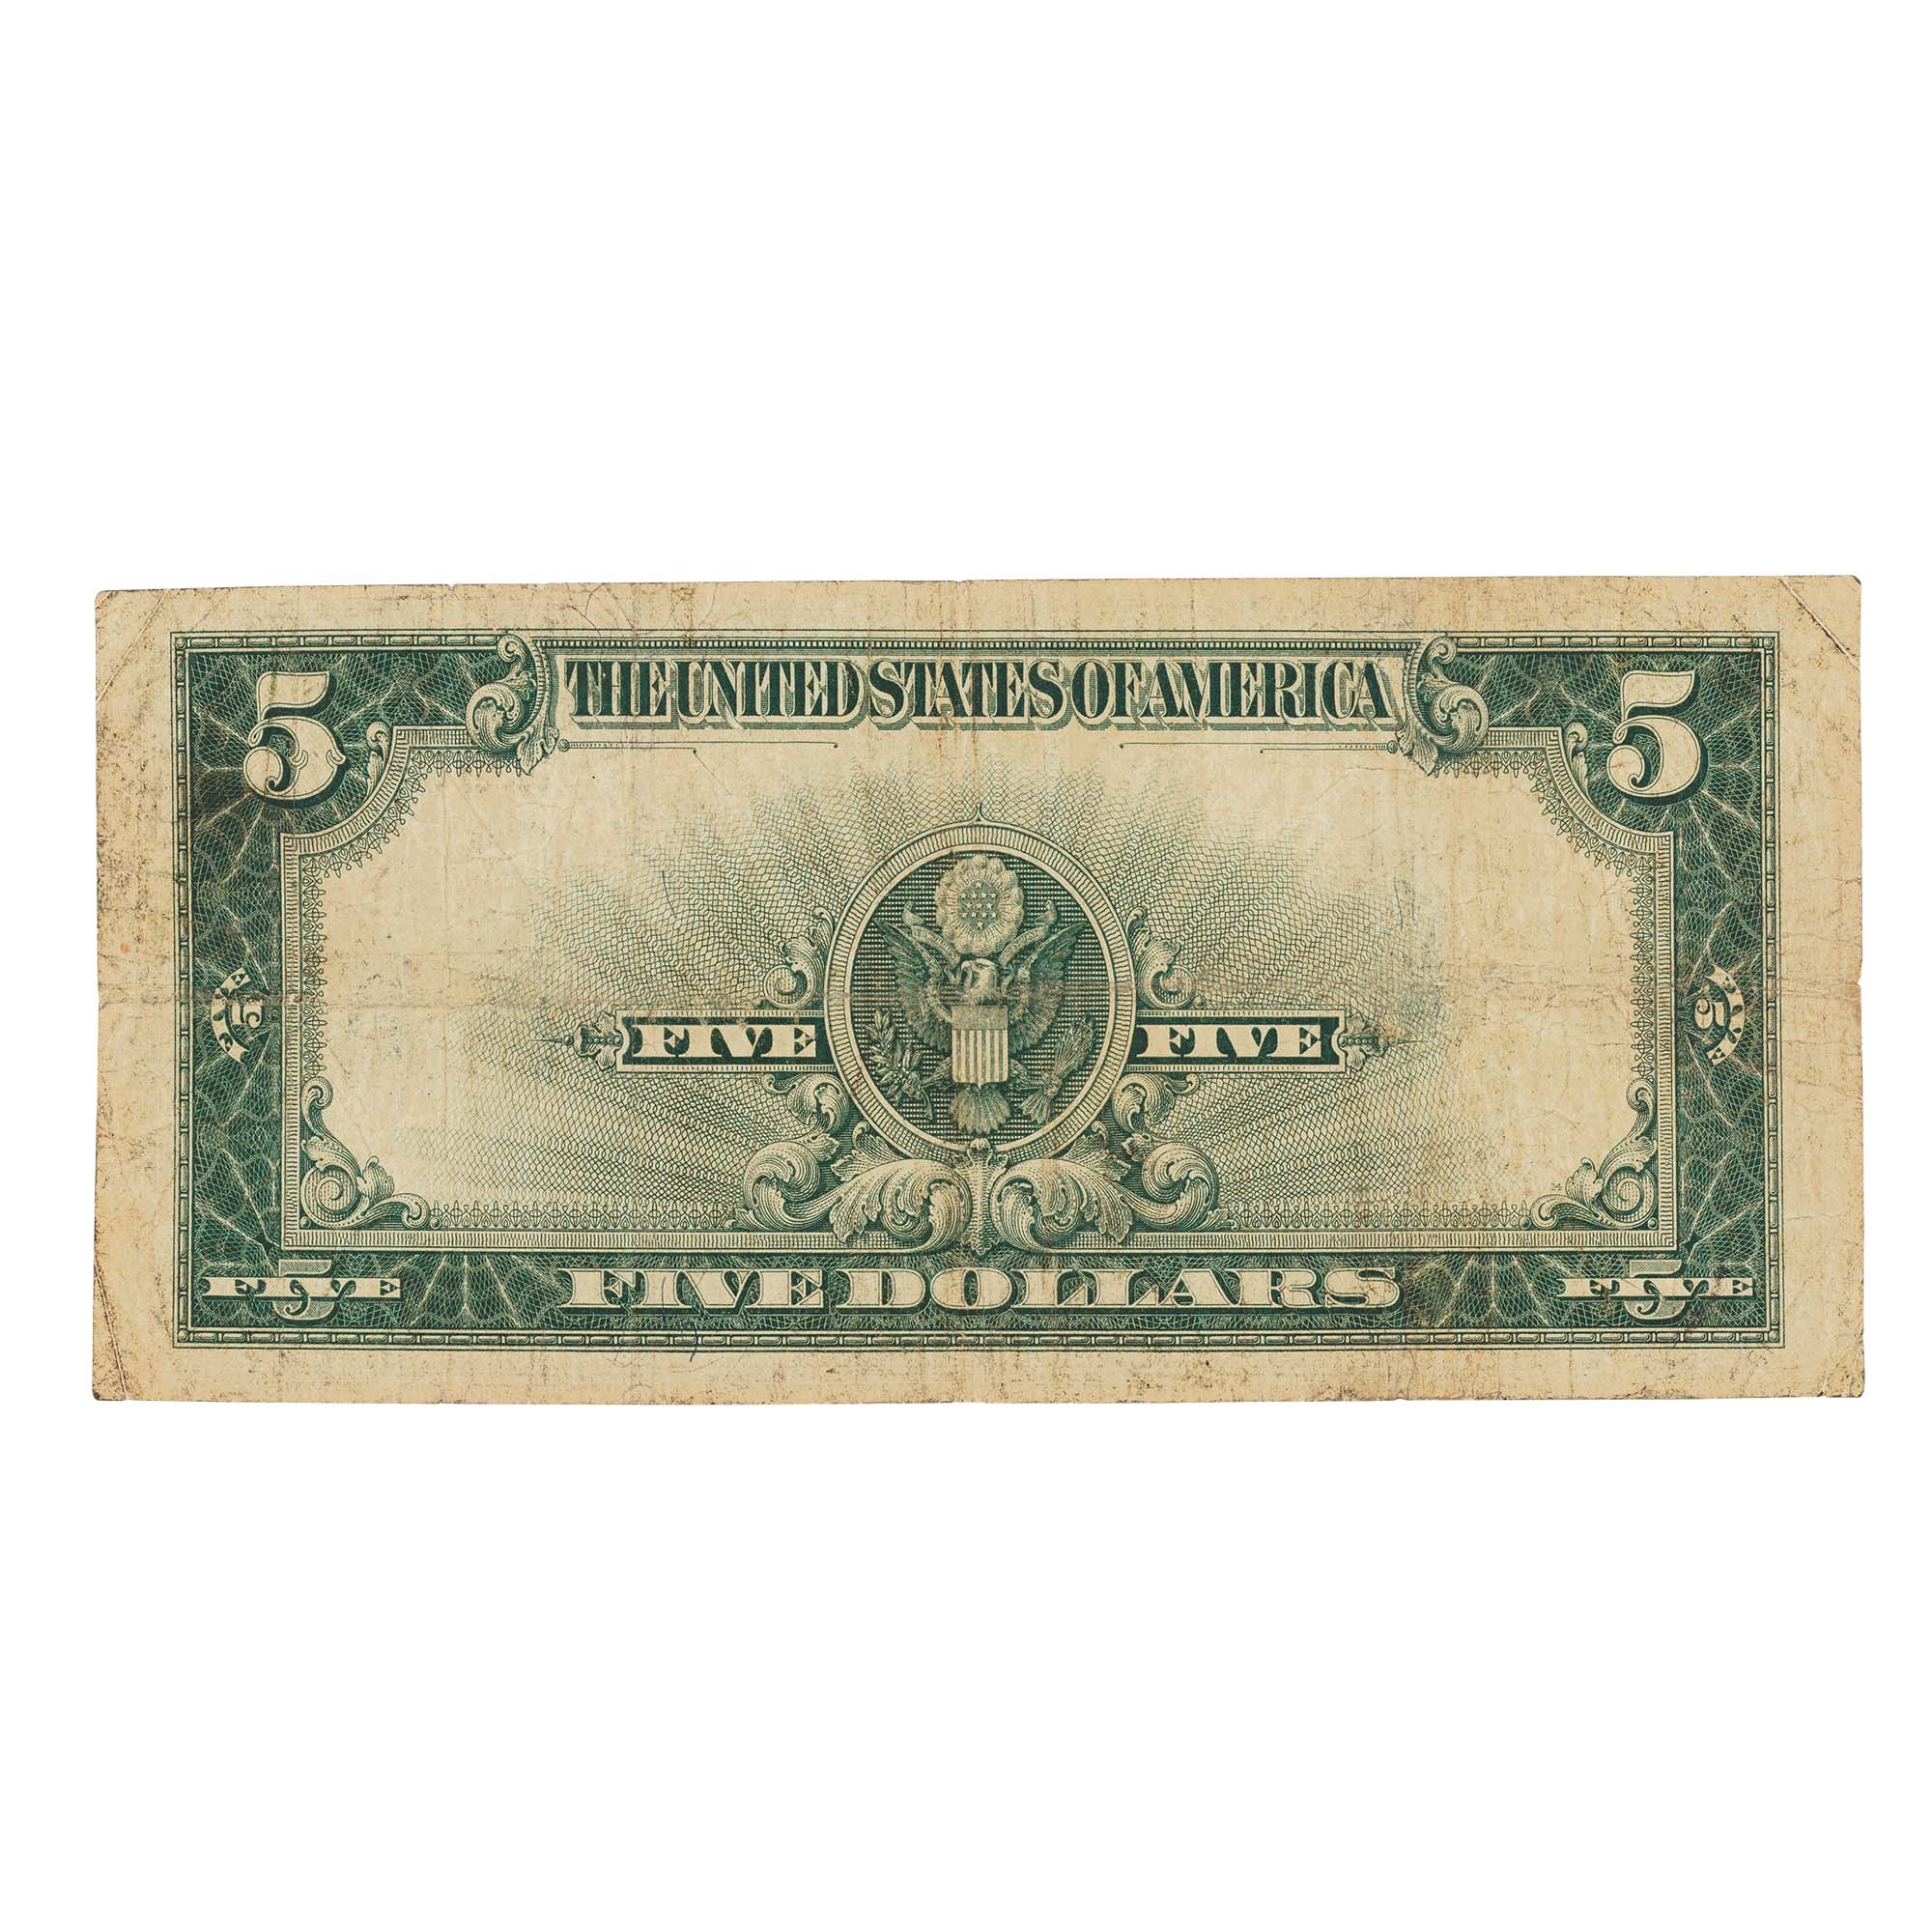 last large size 5 dollar silver certificate SPT a Main